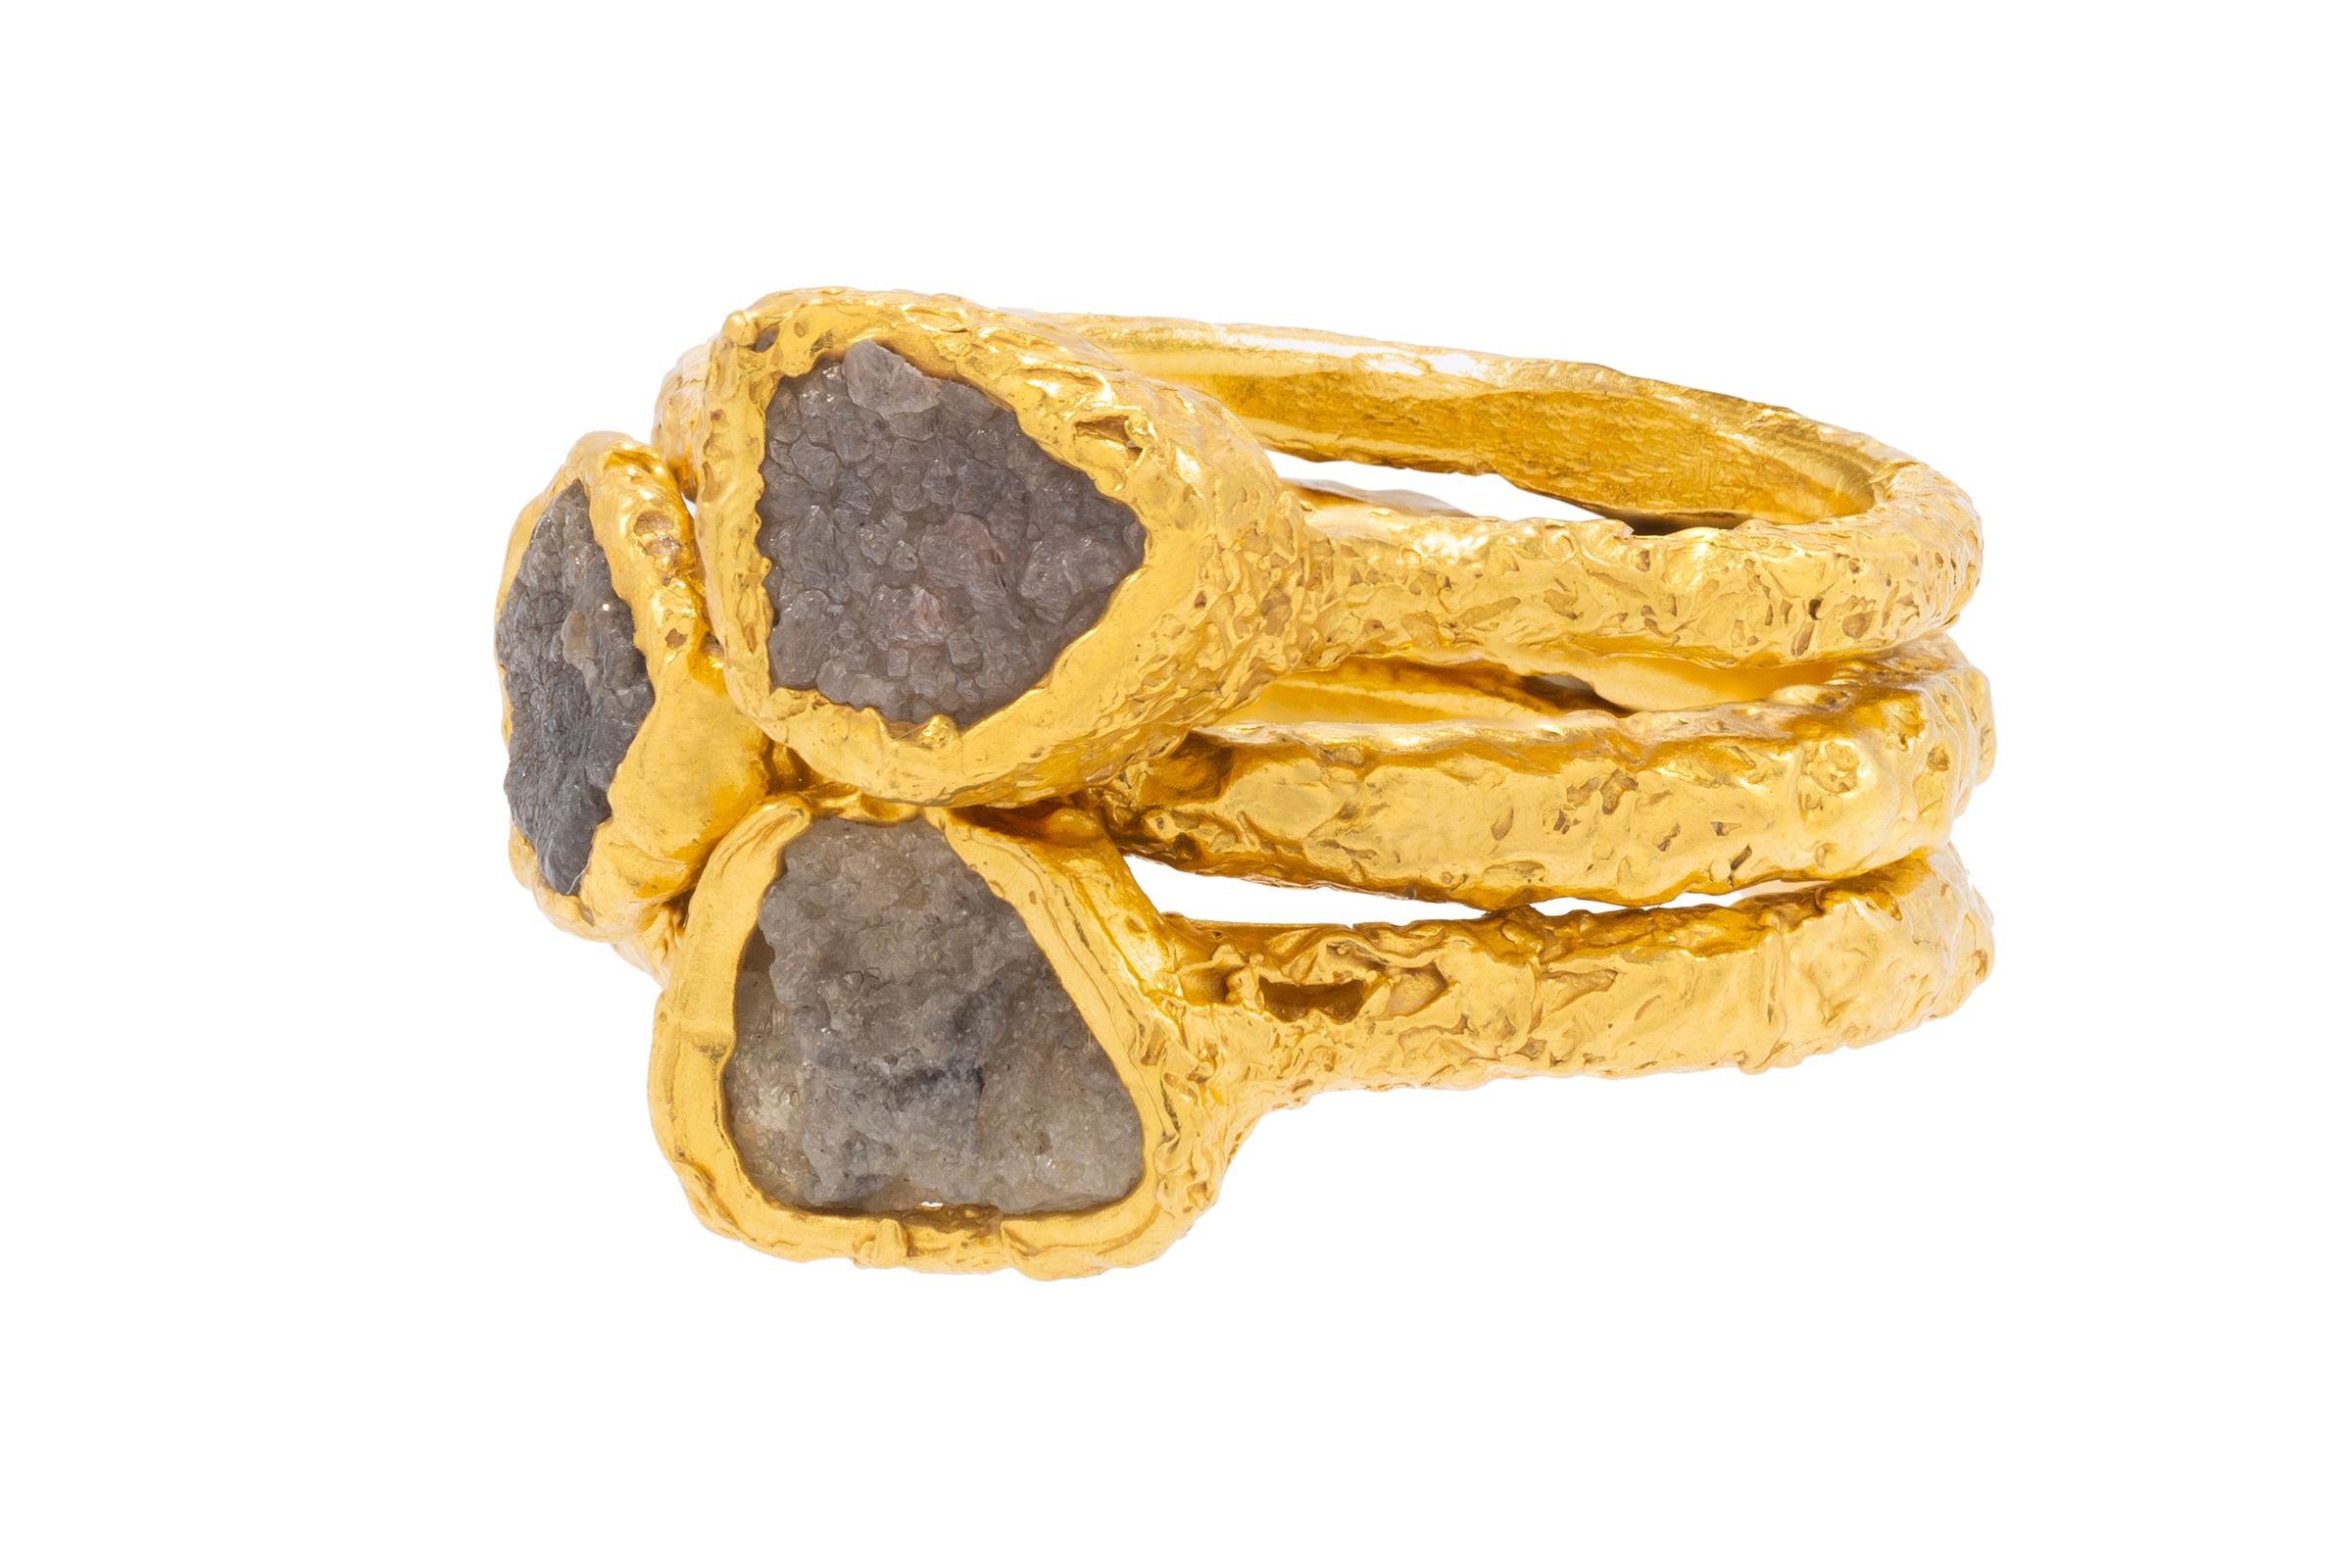 Women's Rough Diamond Stacking Rings in 22k Gold by Tagili